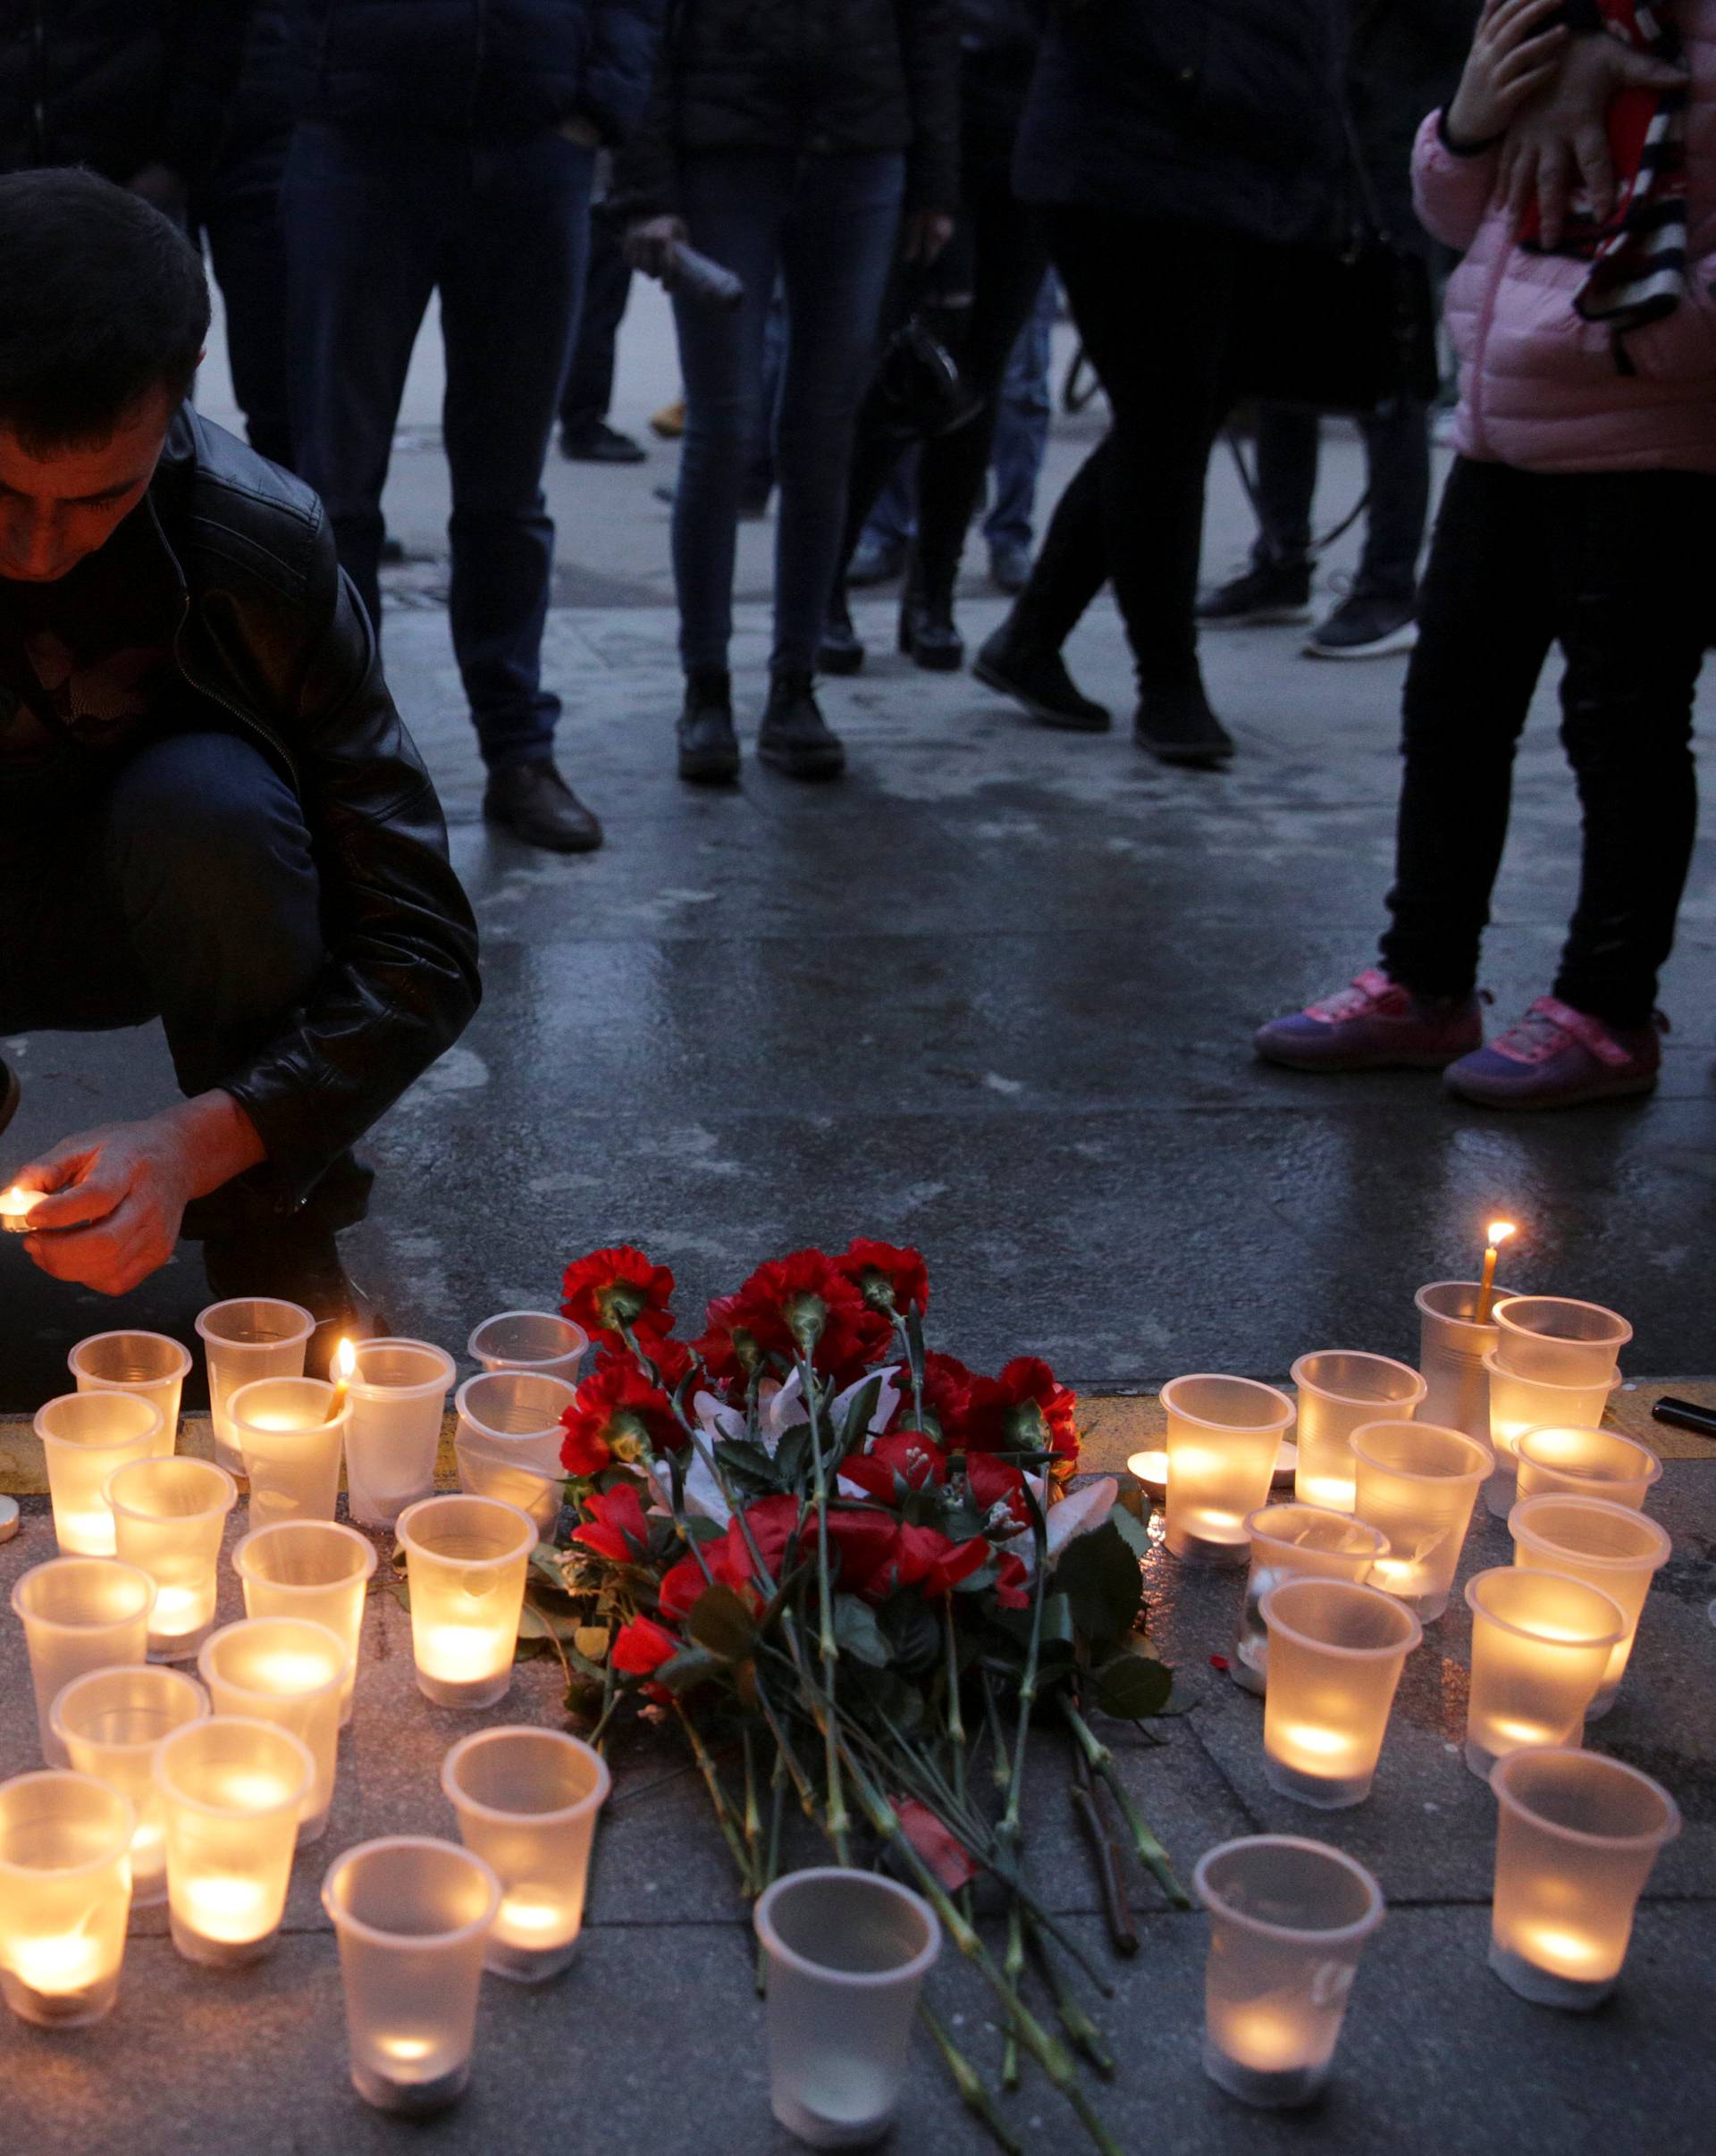 A man lights a candle during a memorial service for victims of a blast in St.Petersburg metro, outside Spasskaya metro station in St. Petersburg